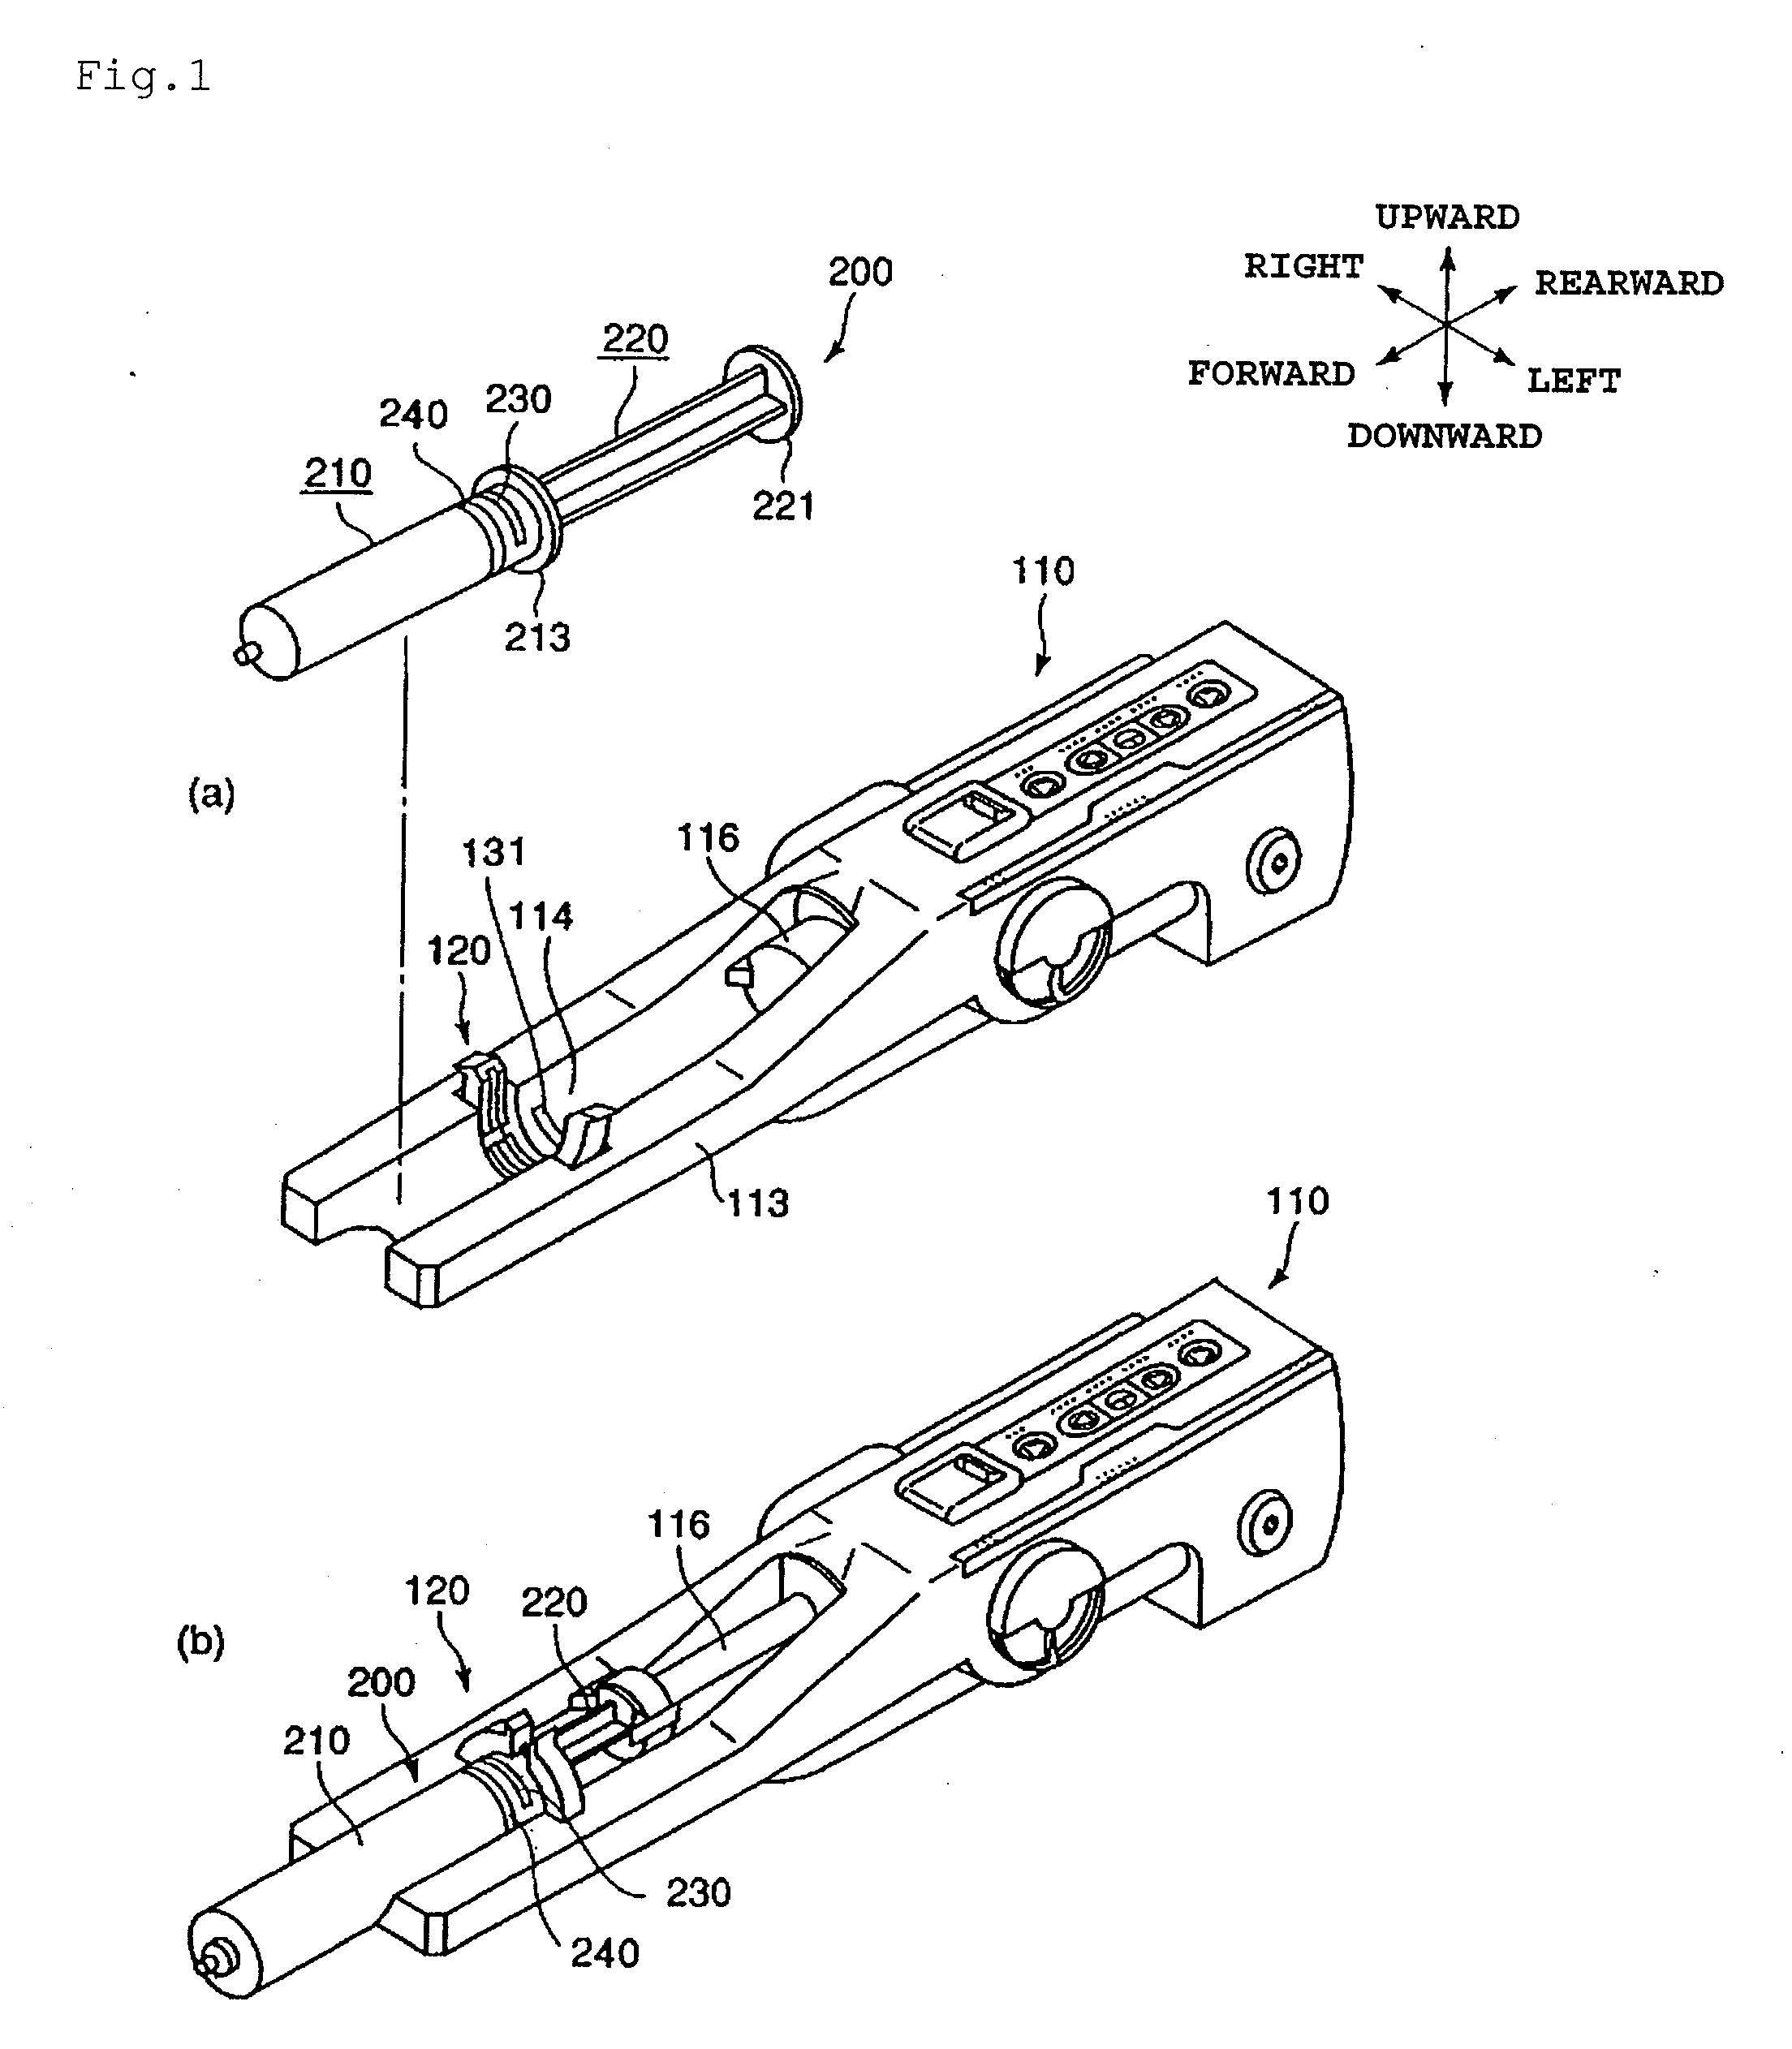 Chemical liquid infusion system